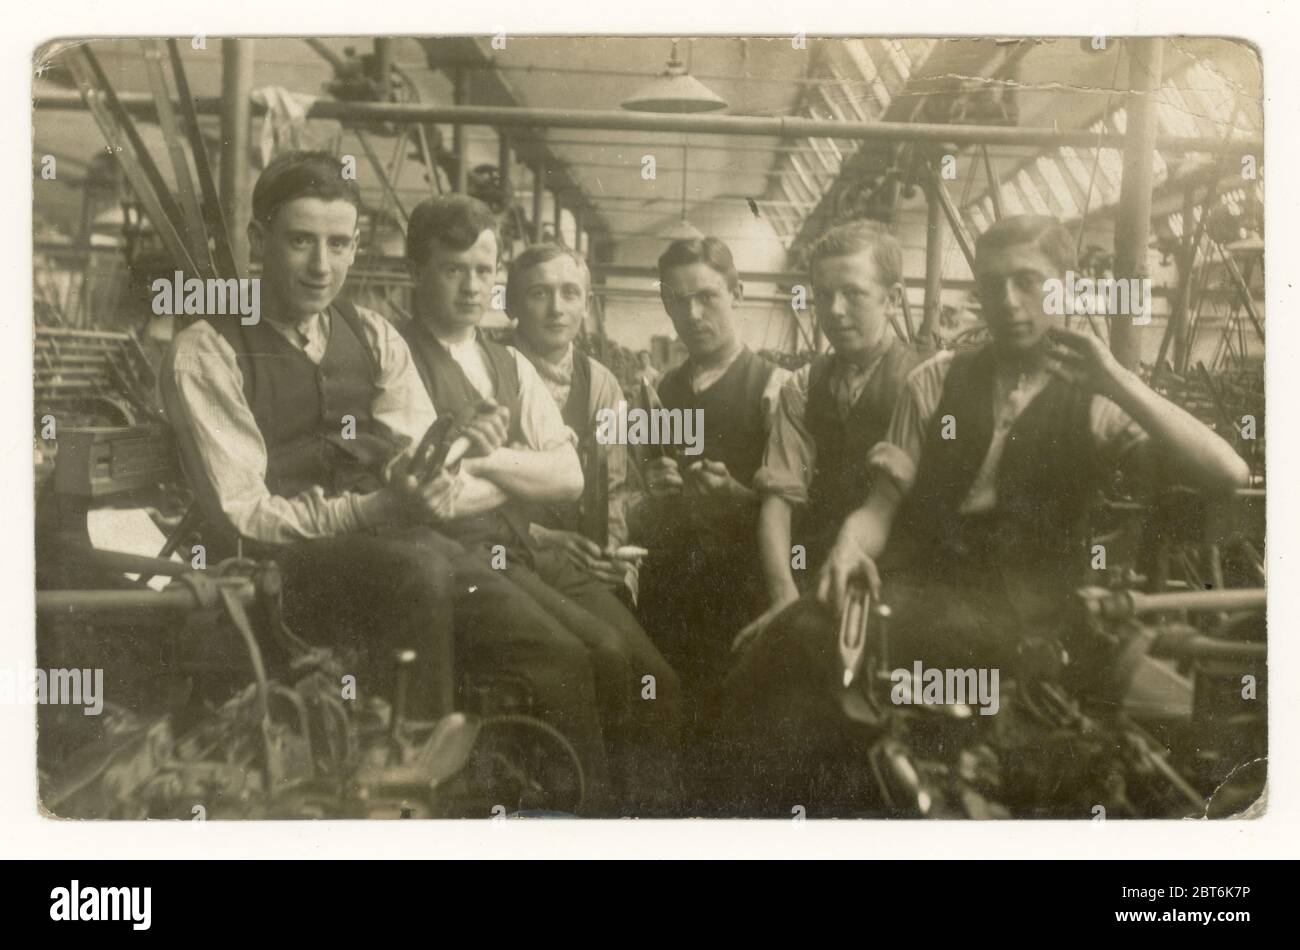 Original early 1900's postcard of group of young male cotton mill workers sitting next to loom machines, showing interior interiors of mill one of the lads is holding a 'flying shuttle' suggesting they are weavers, Blackburn, Lancashire, North West England, U.K. circa 1905 Stock Photo